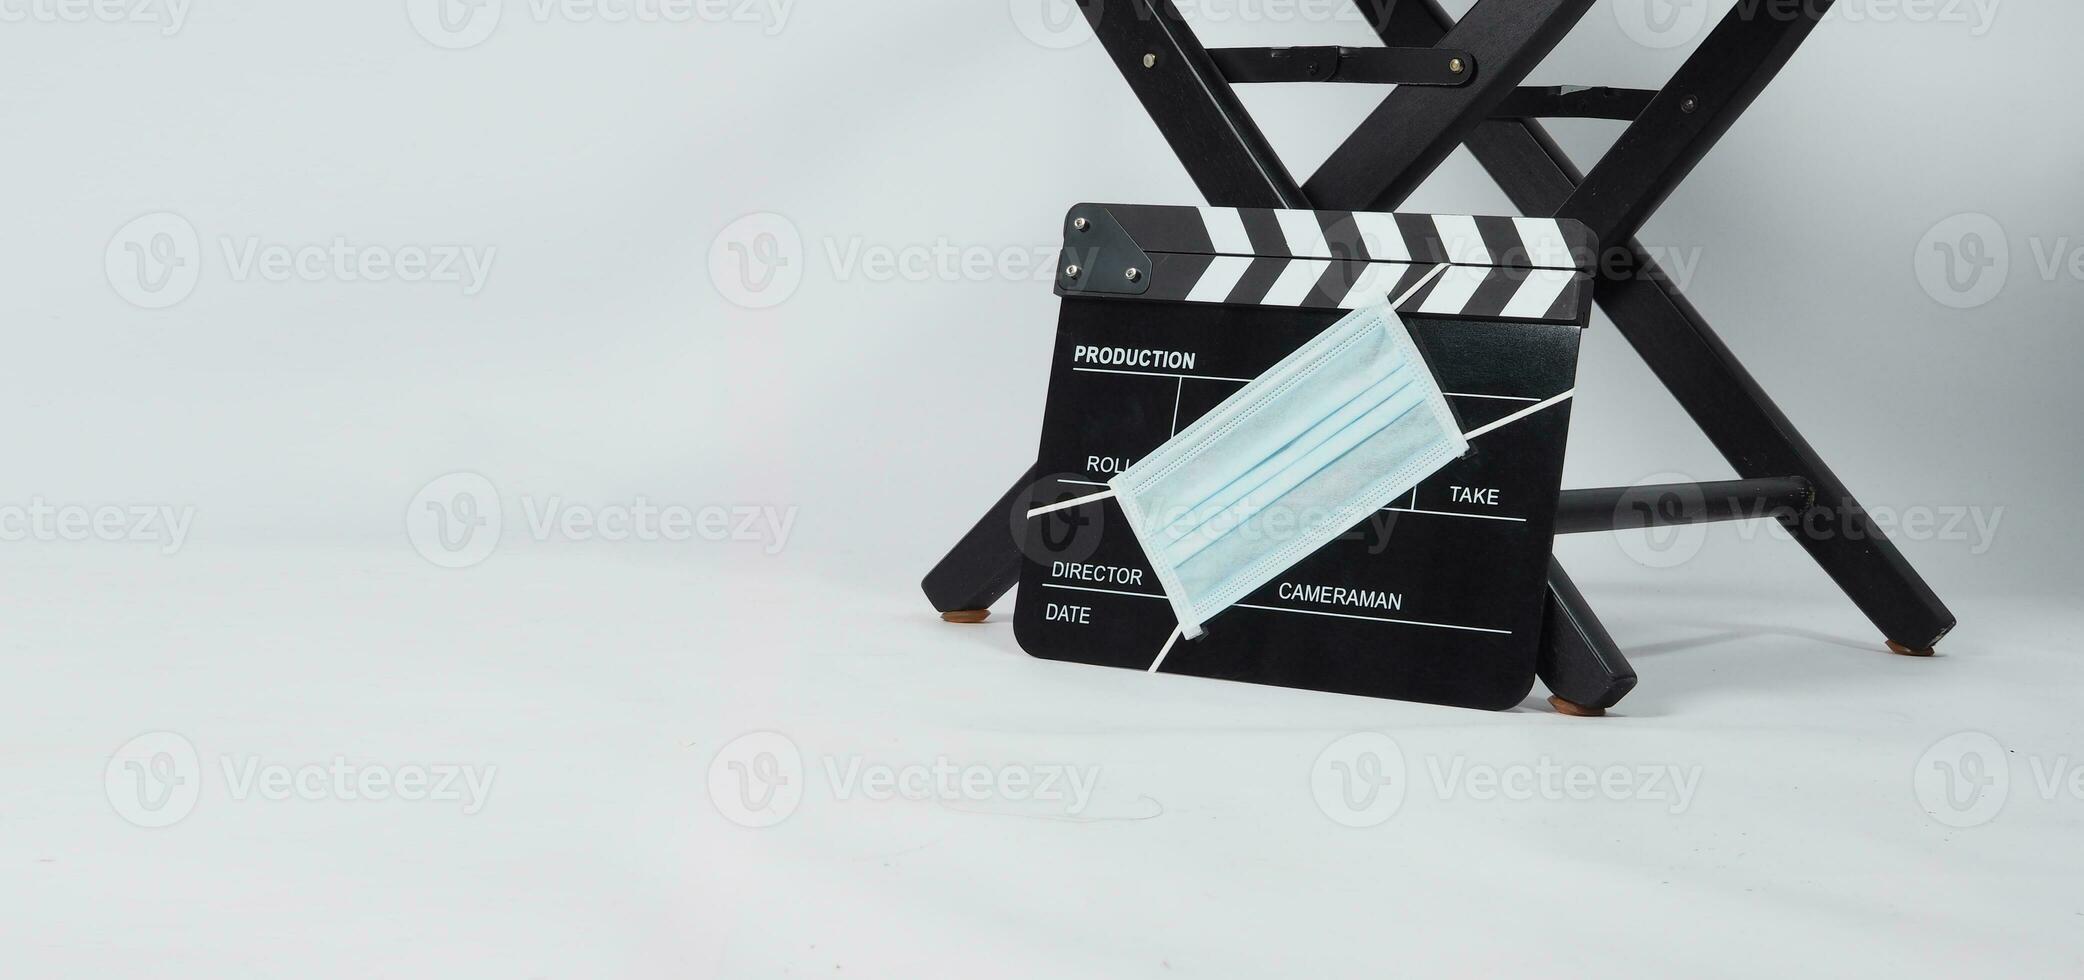 Director chair and black Clapper board or movie slate with face mask. it use in video production and cinema industry on white background. photo